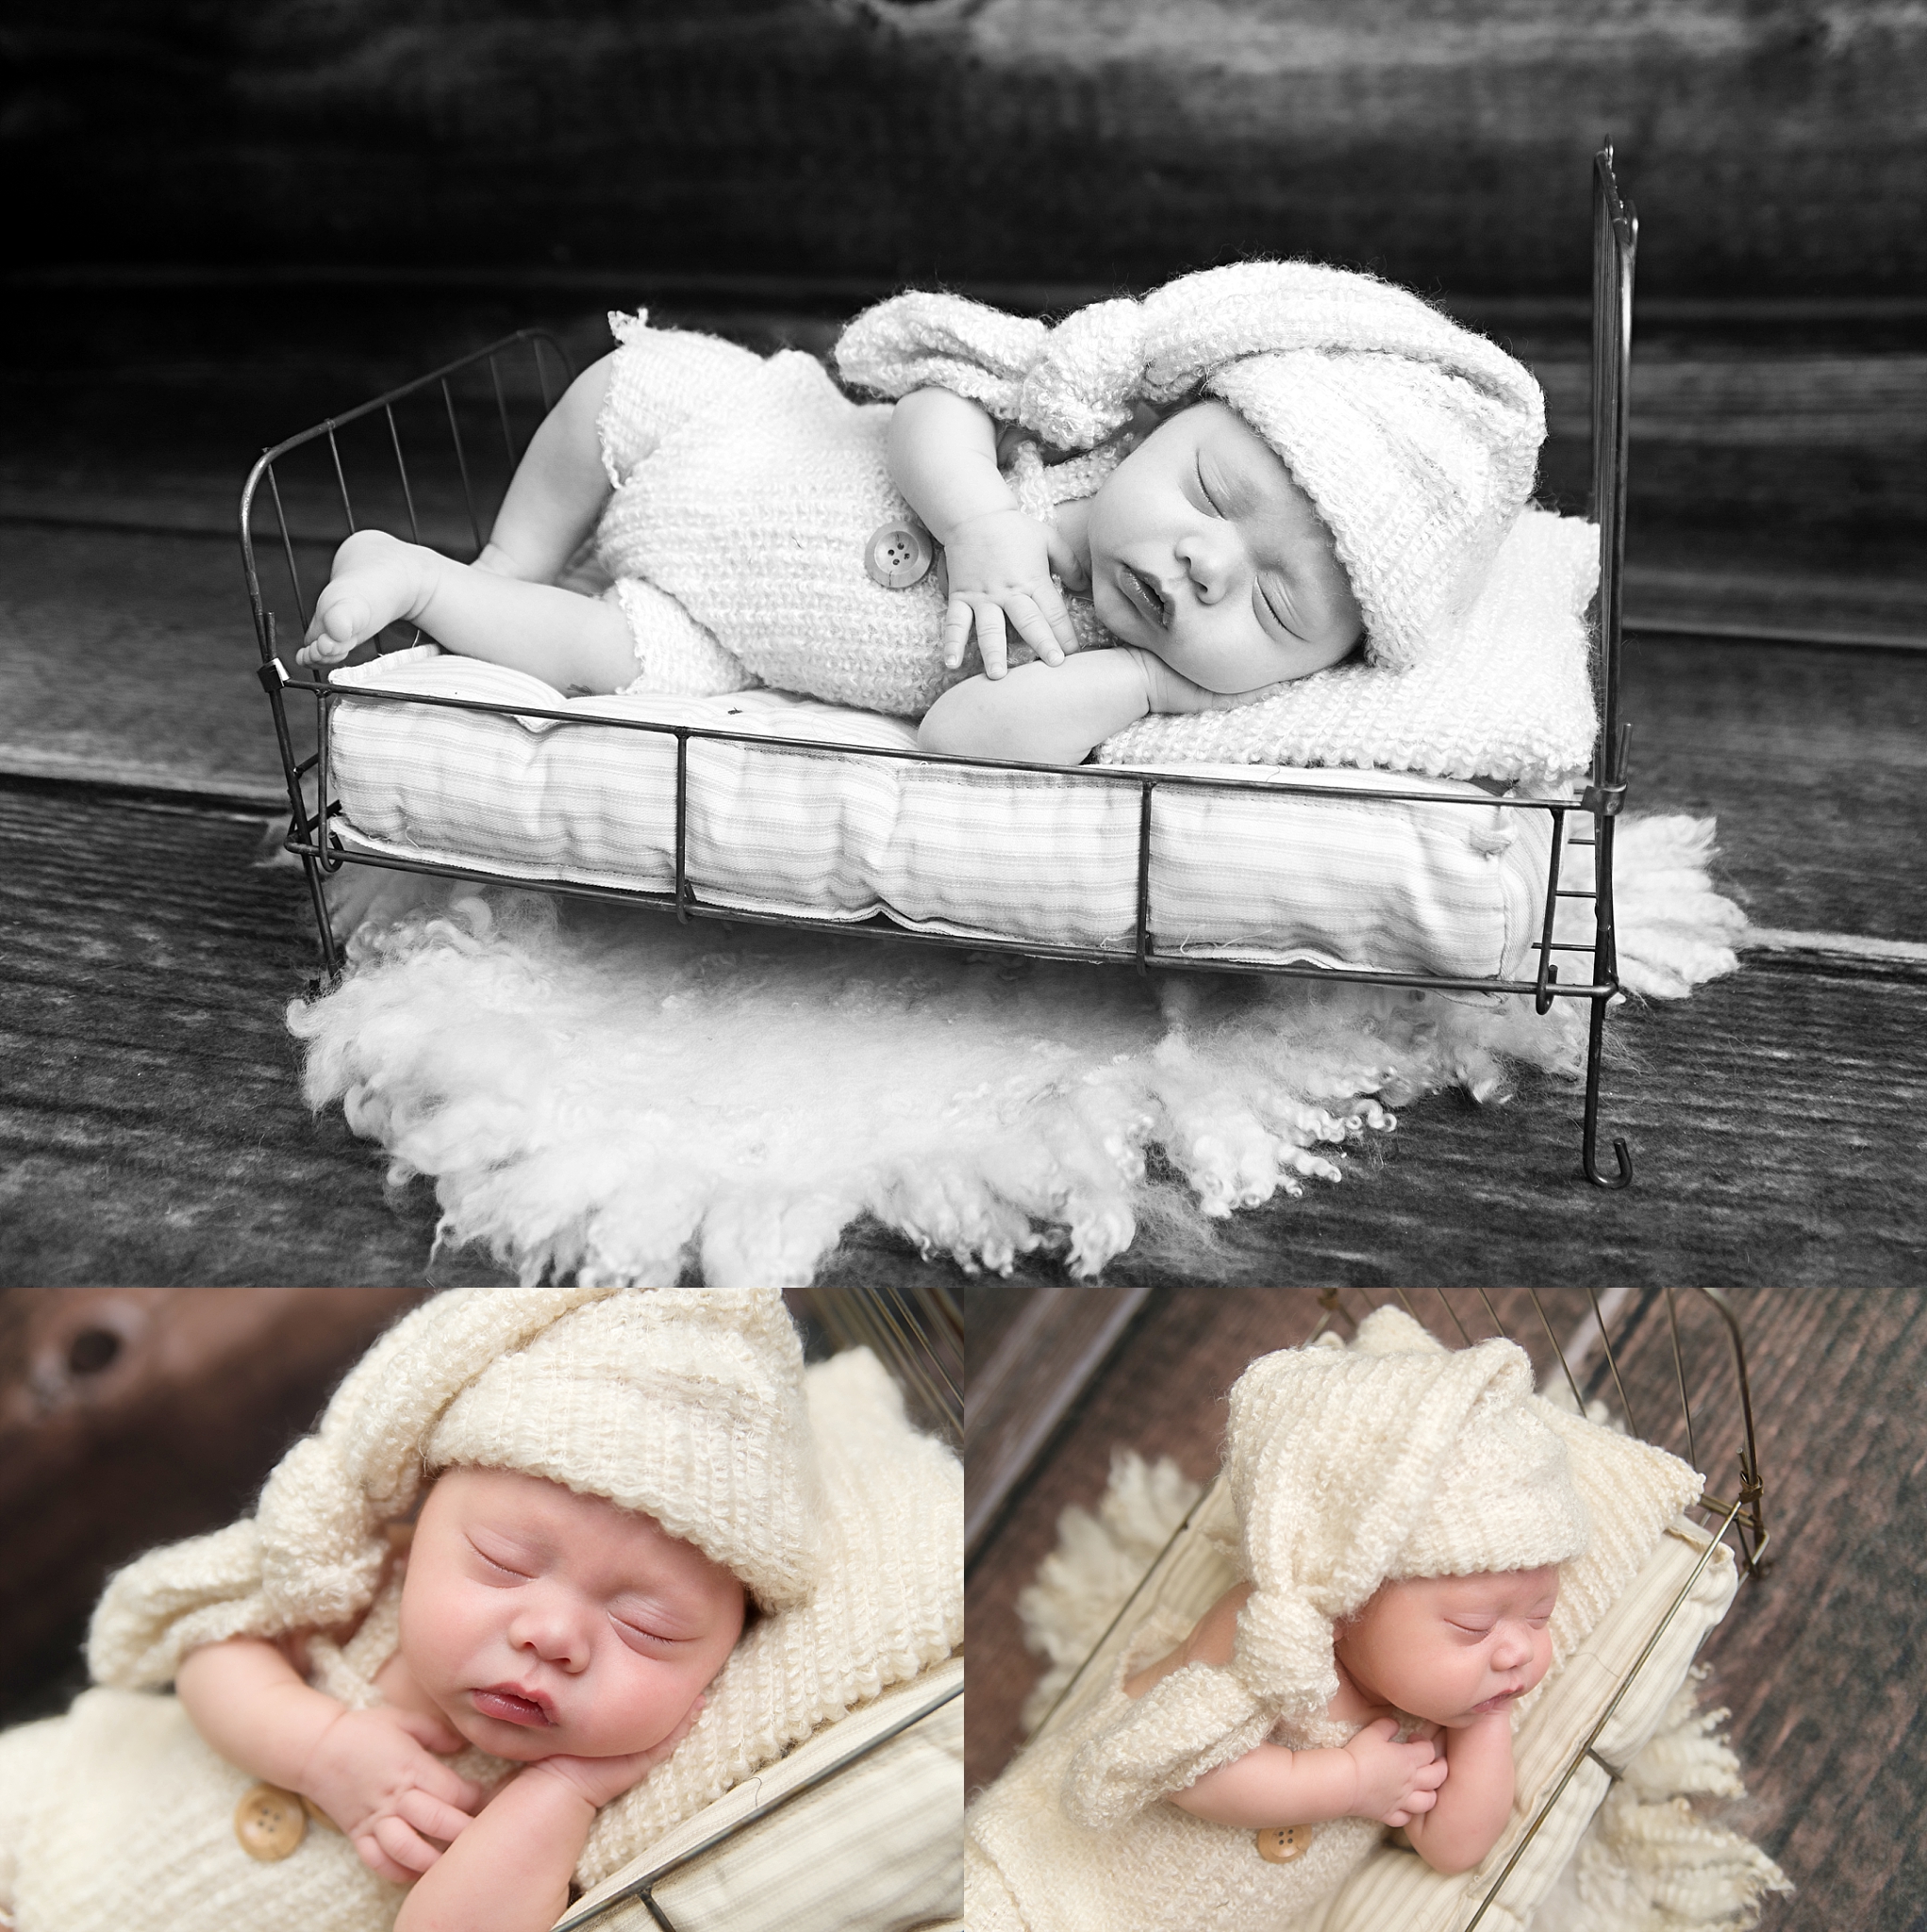 st-louis-newborn-photographer-baby-boy-wearing-fuzzy-cream-romper-and-hat-laying-on-wire-bed-with-wood-backdrop.jpg